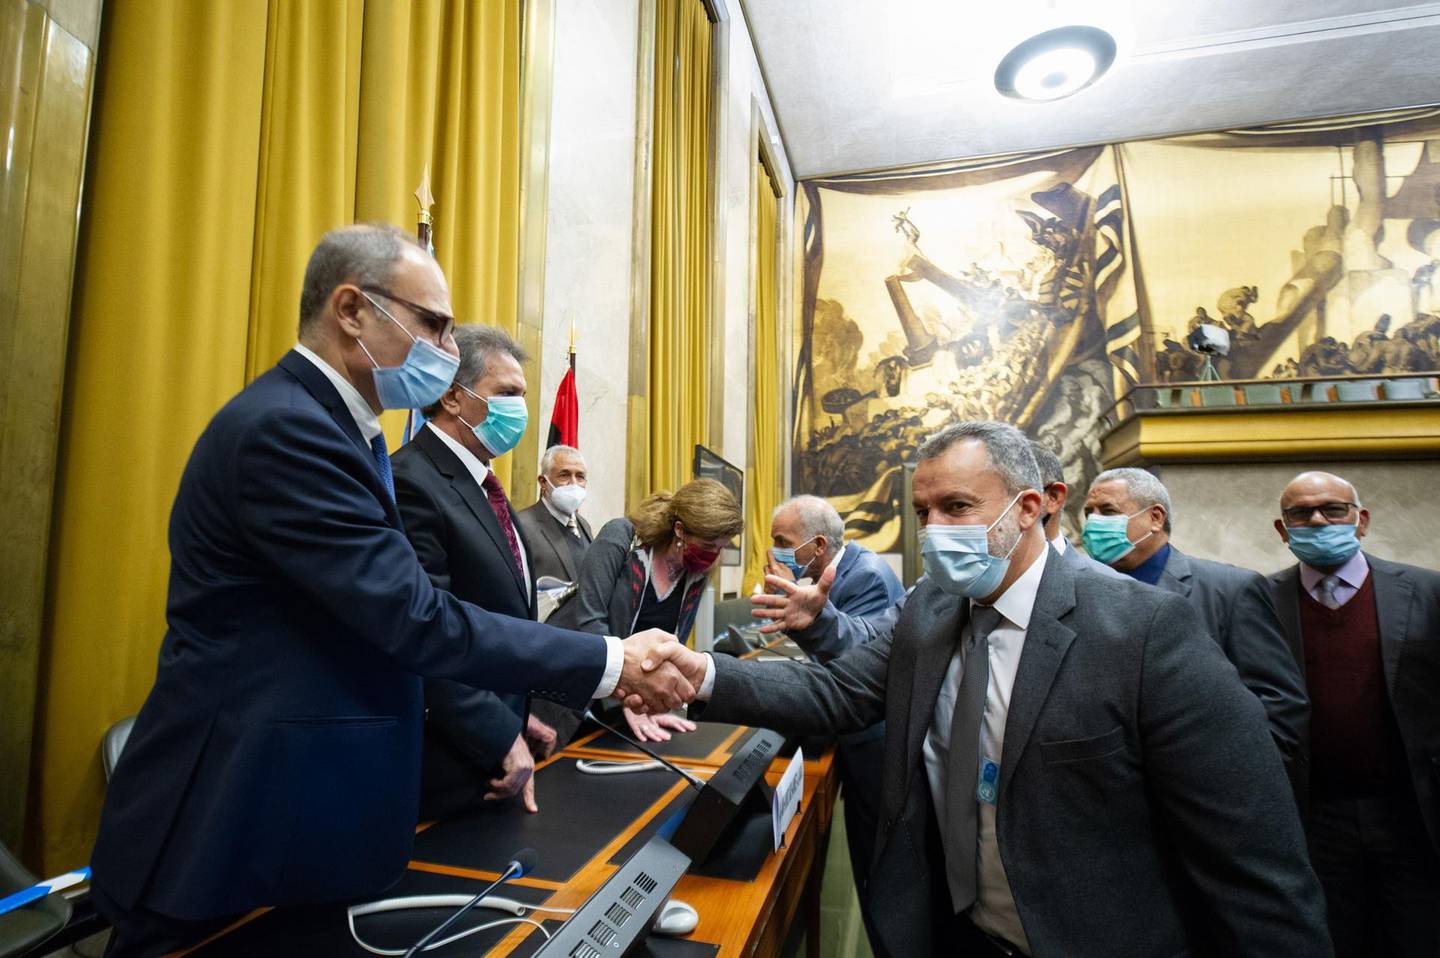 This handout photograph released on October 23, 2020 by the United Nations Office in Geneva shows representative of Libya's two rival factions shaking hands after a signing ceremony, on October 23, 2020. Libya's two rival factions signed a "permanent" ceasefire agreement after five days of talks at the United Nations, which hailed the deal as a historic moment after years of turmoil and bloodshed. "Today is a good day for the Libyan people," said Stephanie Williams, the UN's acting envoy to the troubled North African country, where a UN-recognised government in Tripoli has been battling a rival administration based in the east and dominated by military commander Khalifa Haftar. - RESTRICTED TO EDITORIAL USE - MANDATORY CREDIT "AFP PHOTO / UNITED NATIONS / VIOLAINE MARTIN" - NO MARKETING NO ADVERTISING CAMPAIGNS - DISTRIBUTED AS A SERVICE TO CLIENTS


 / AFP / UNITED NATIONS / UNITED NATIONS / Violaine MARTIN / RESTRICTED TO EDITORIAL USE - MANDATORY CREDIT "AFP PHOTO / UNITED NATIONS / VIOLAINE MARTIN" - NO MARKETING NO ADVERTISING CAMPAIGNS - DISTRIBUTED AS A SERVICE TO CLIENTS


